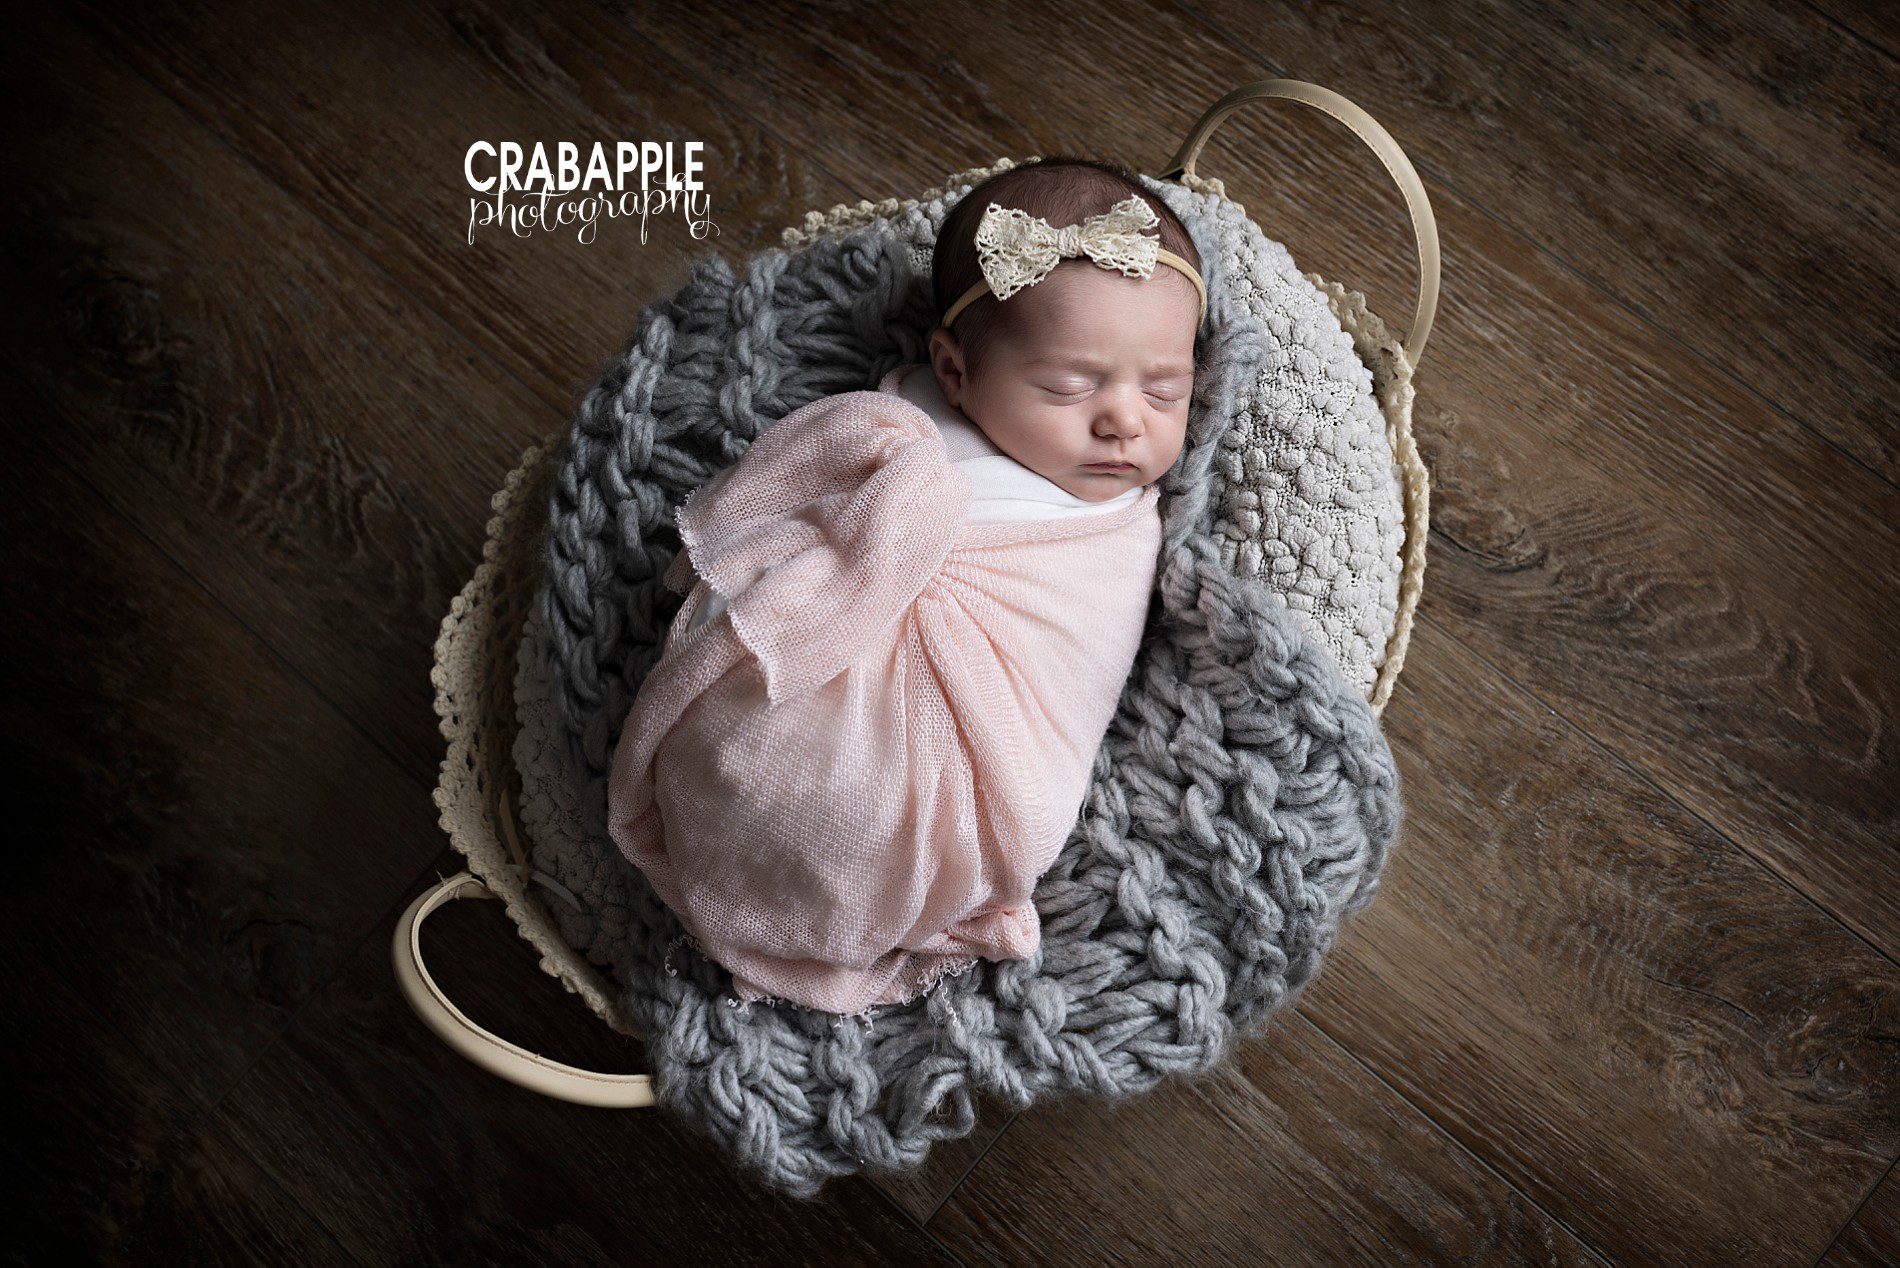 Bows, blankets, and vintage inspired basket props for newborn baby girl photos